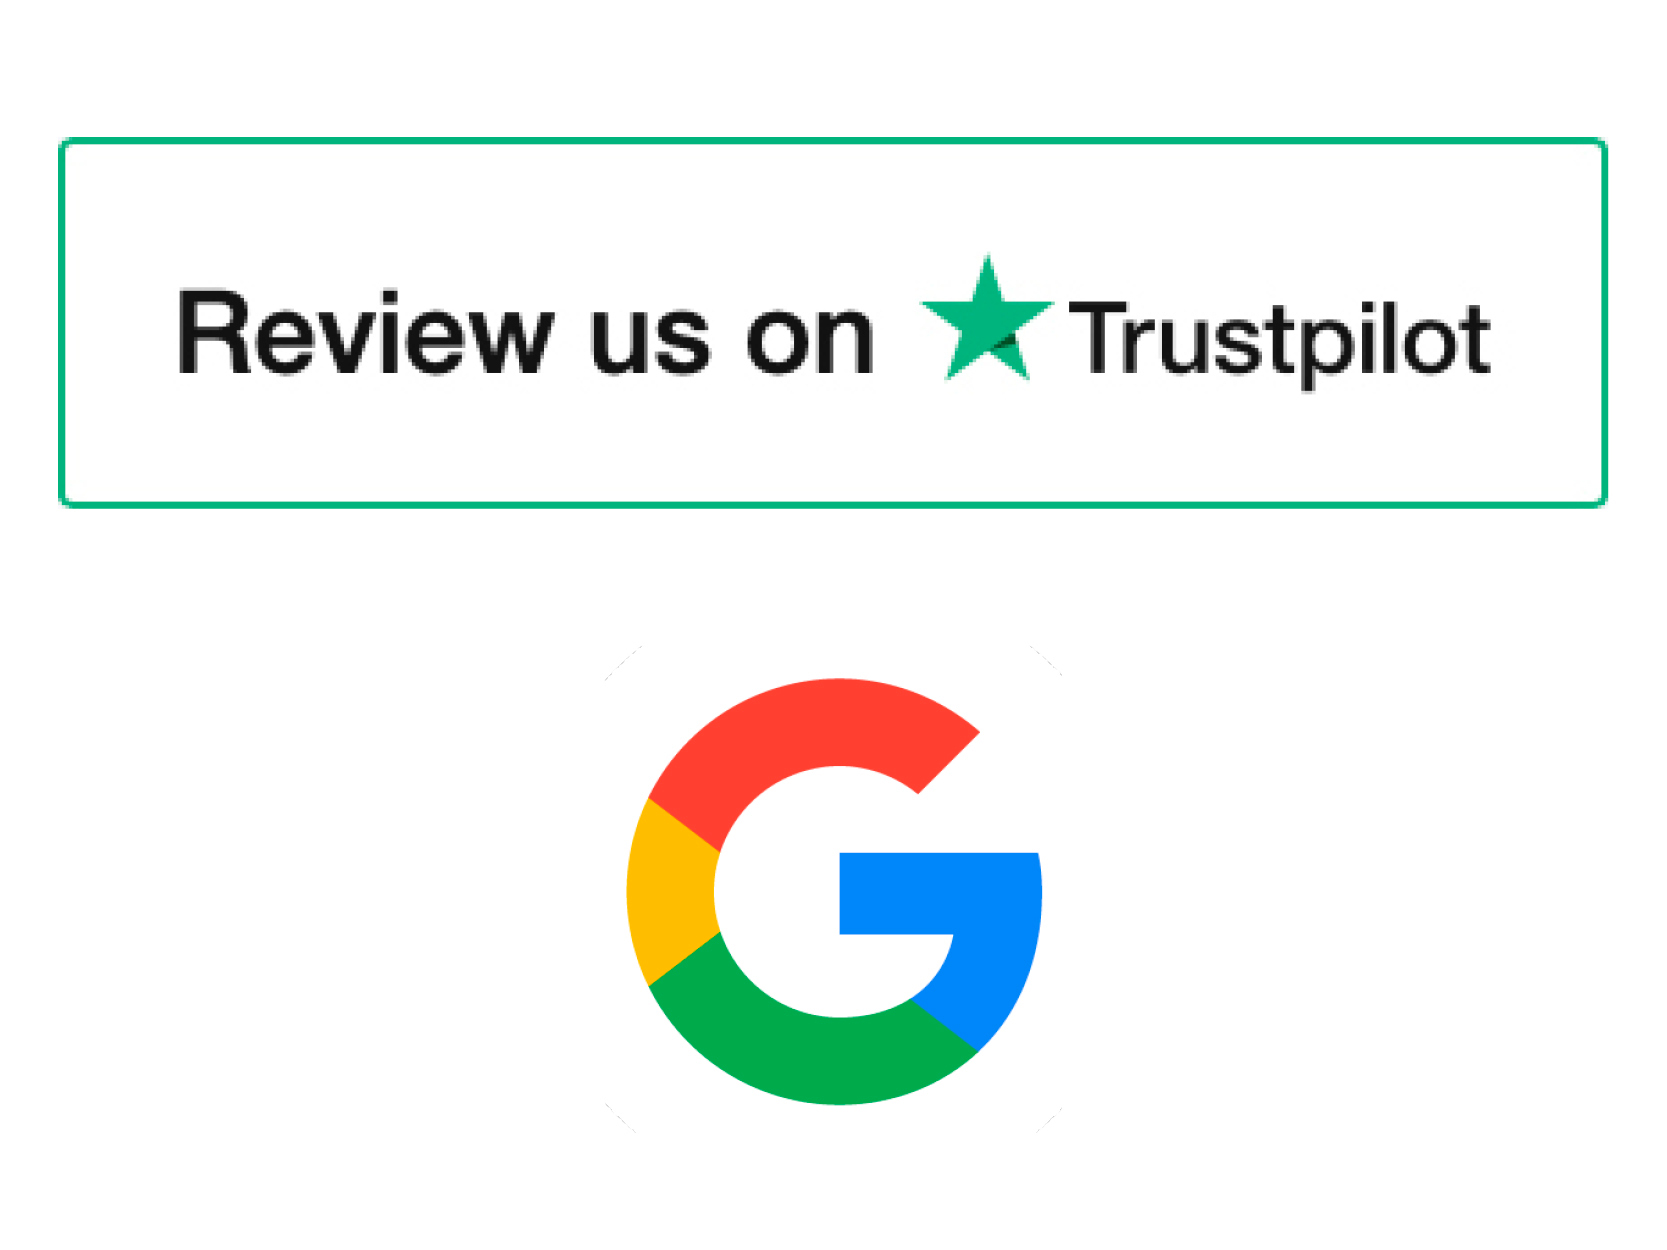 Highly rated on Google and Trustpilot